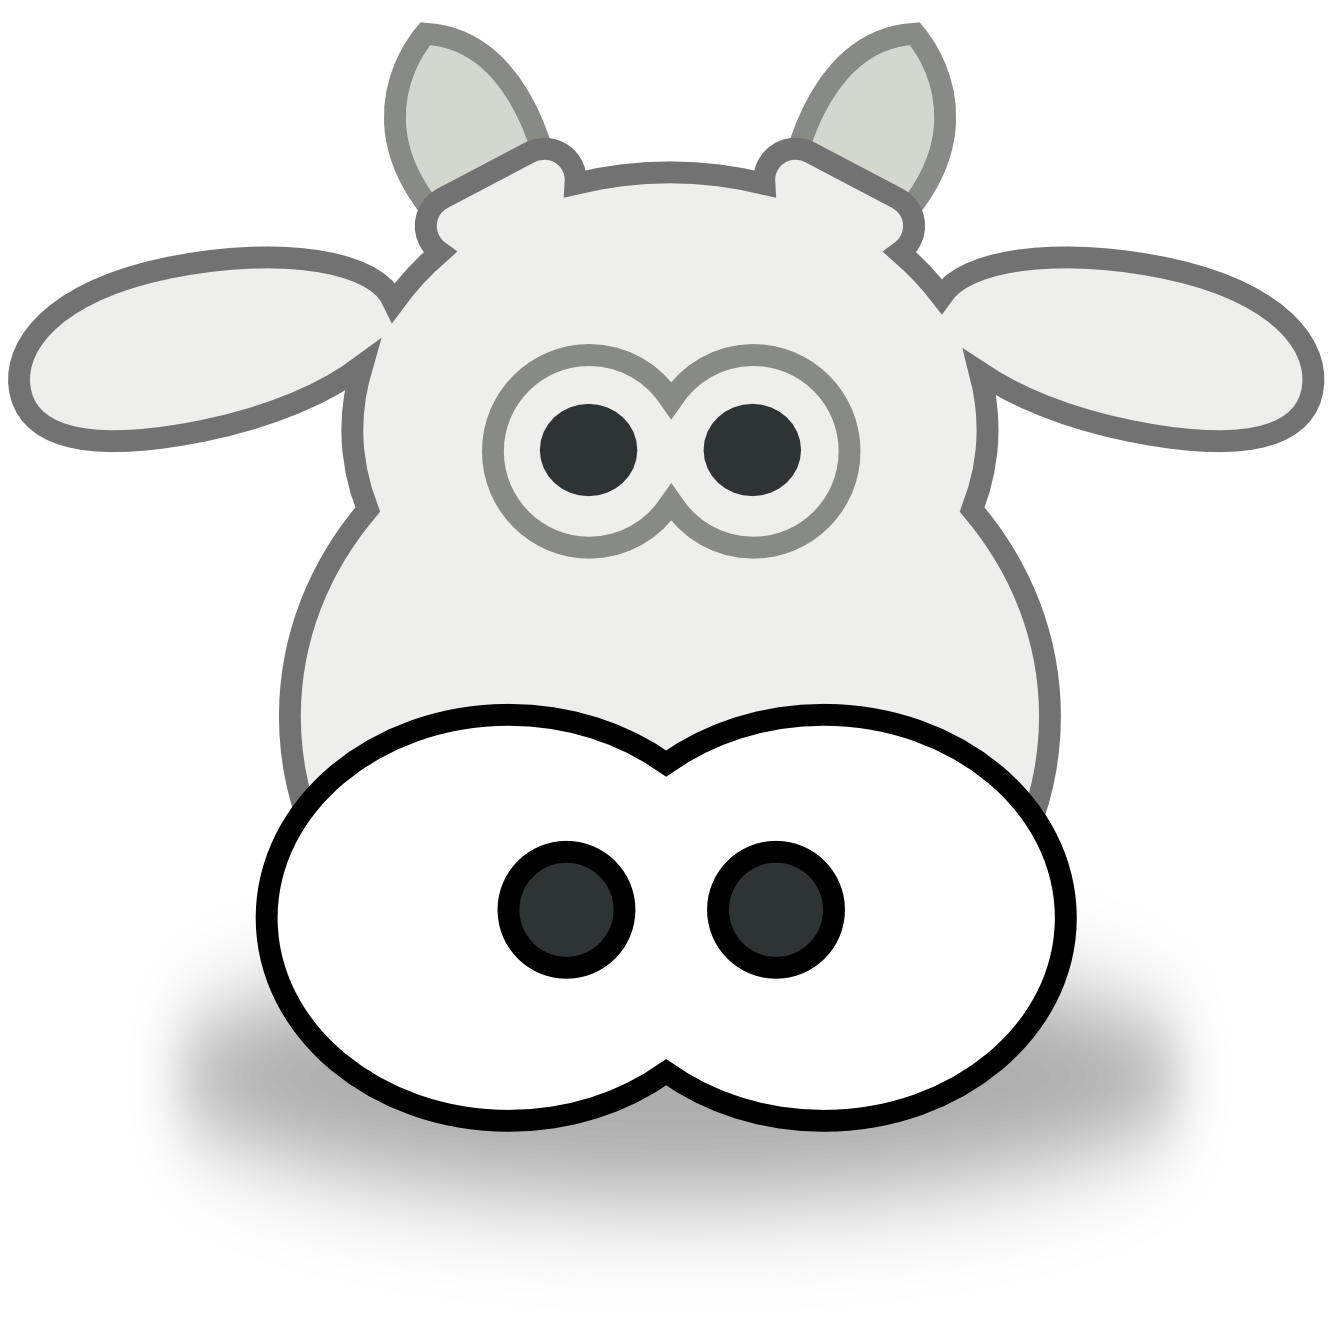 Panda clipart mask. Cow face free images